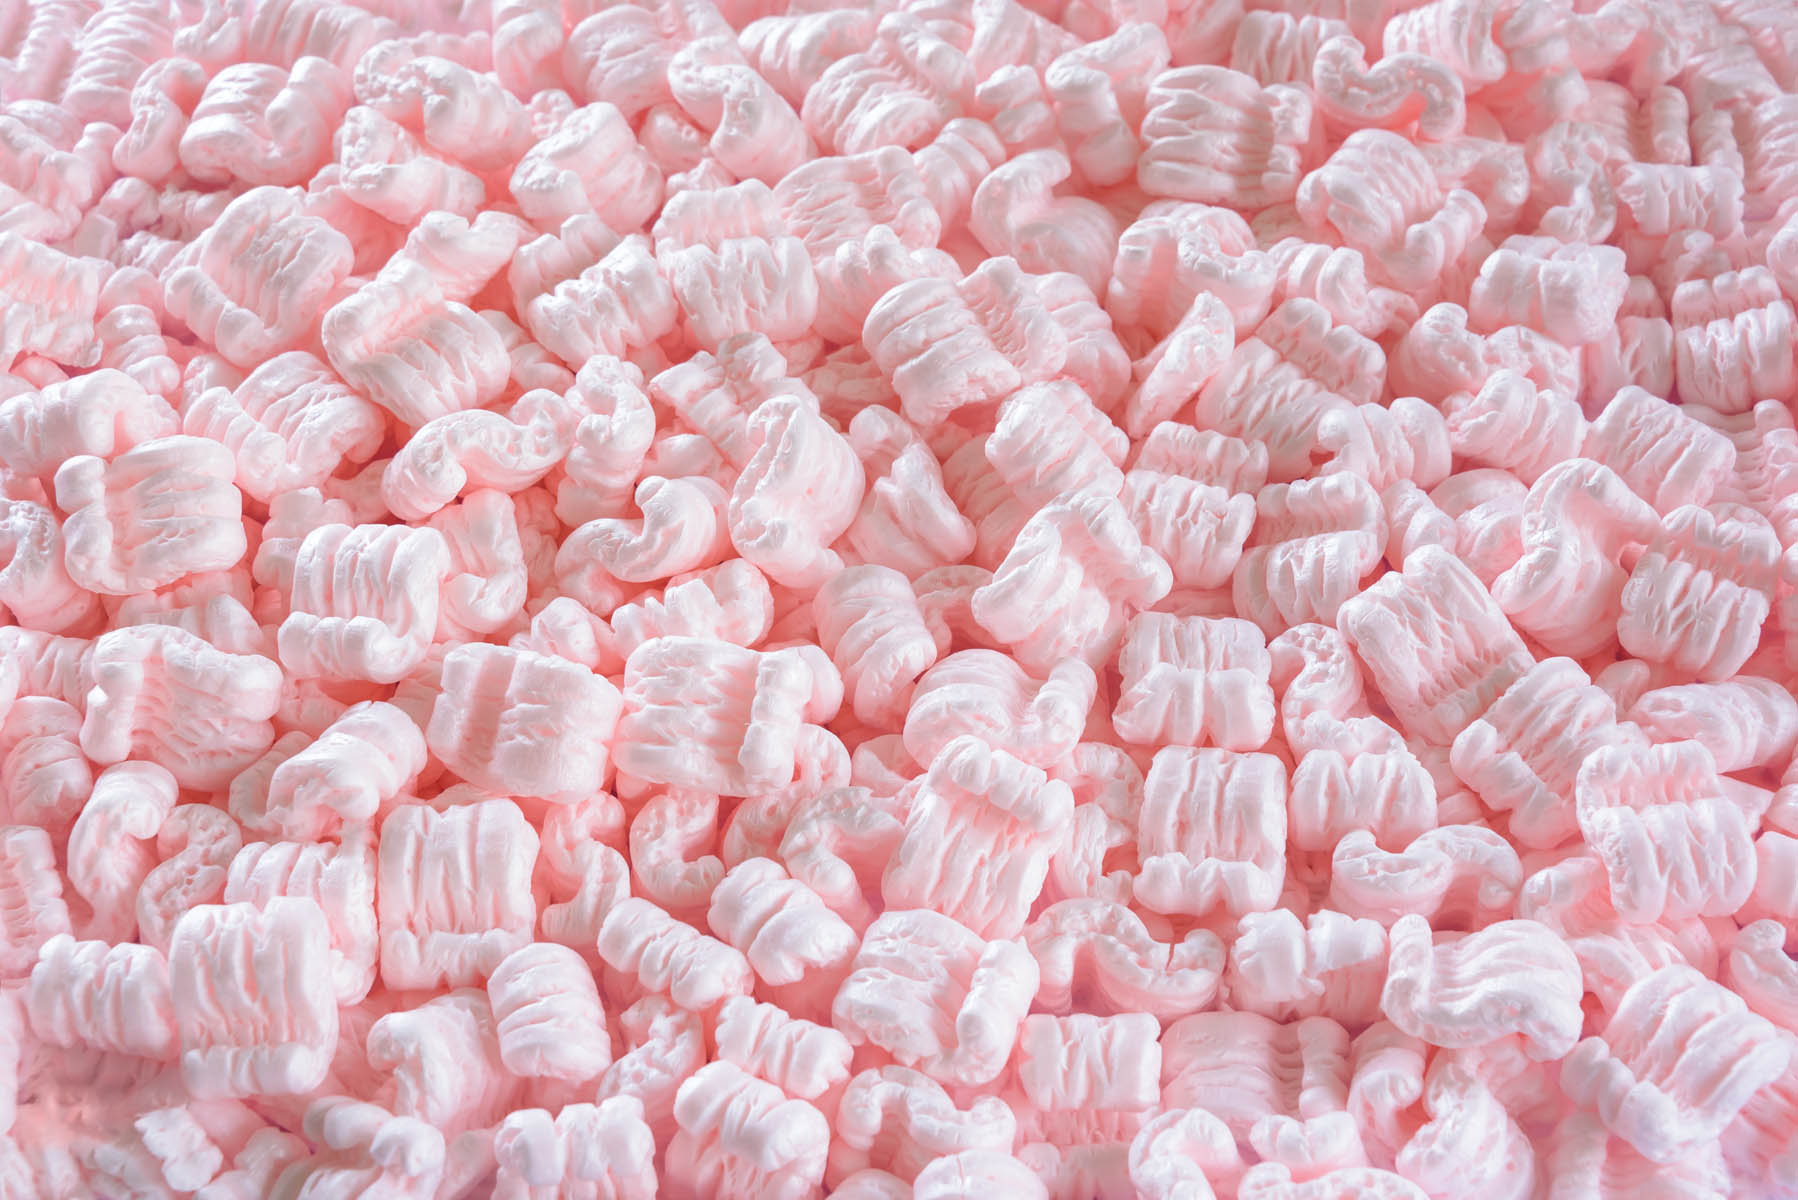 S-shaped pink packing peanuts as a background